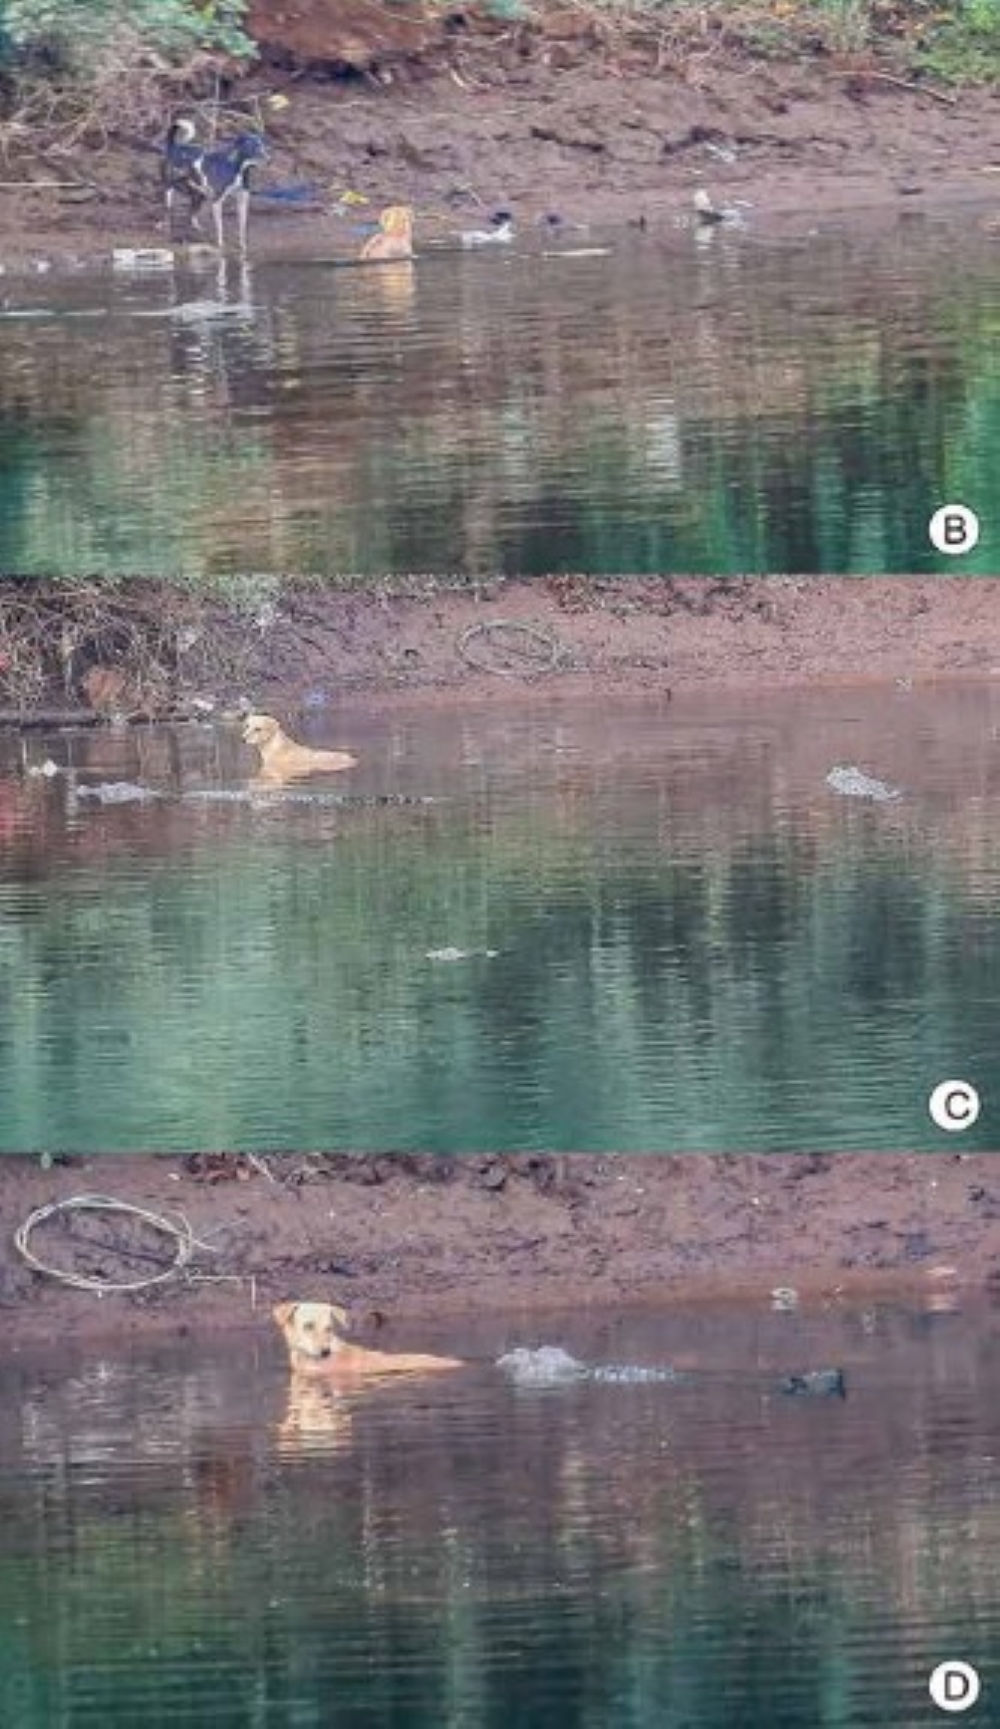 a series of photos showing a dog in a river with a crocodile approaching